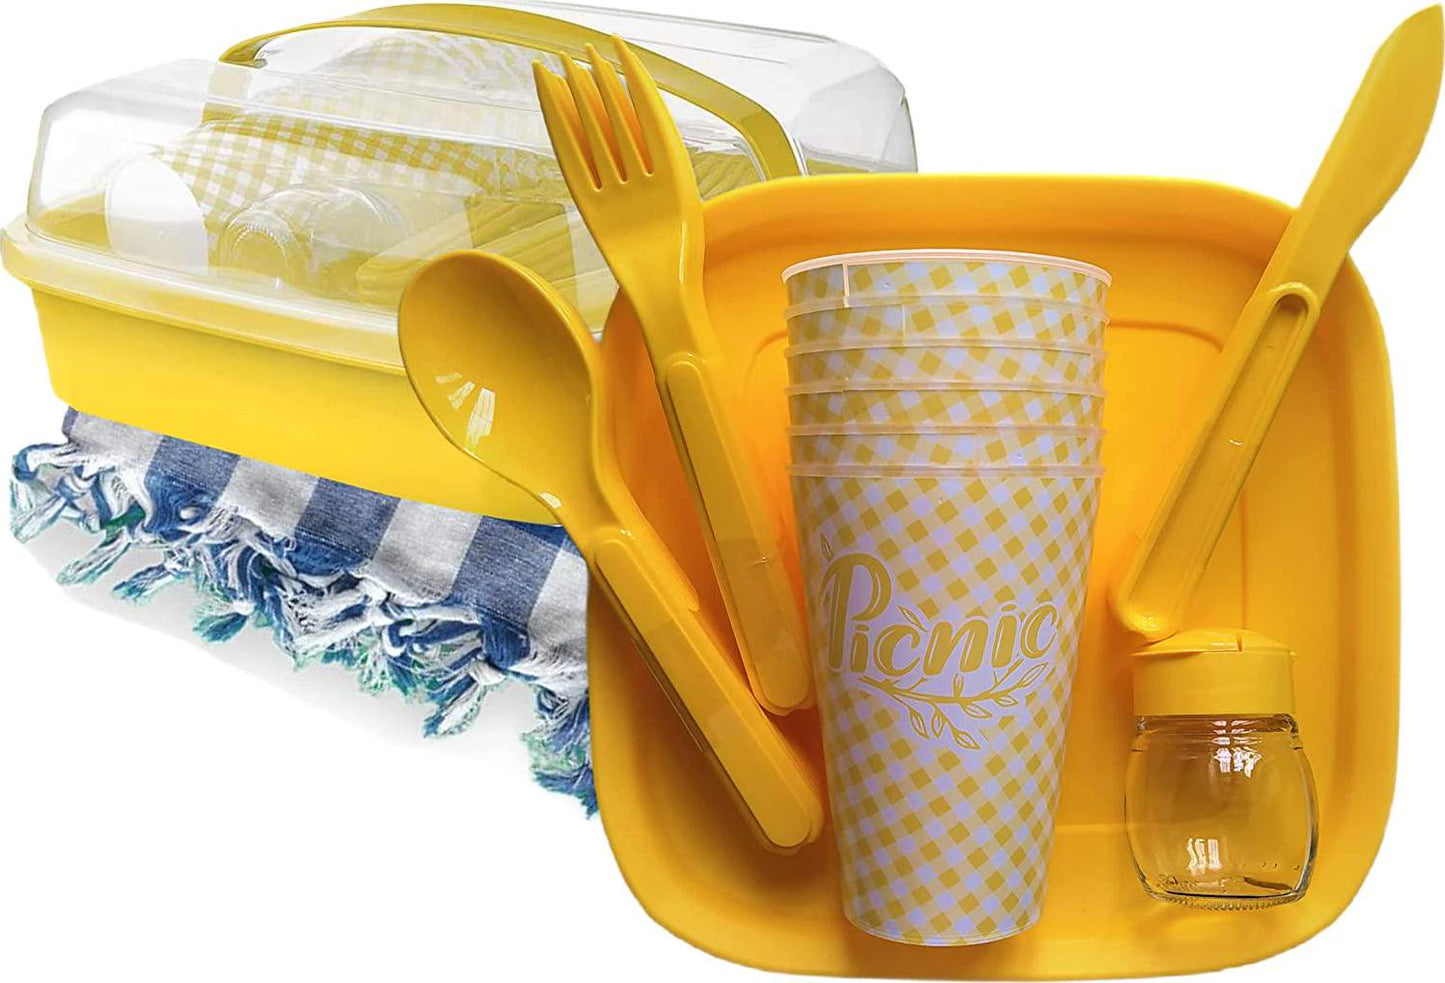 33 Piece Plastic Picnic Set for Camping Outdoor with Carry Case and with Tablecloth Picnic Blanket, (Set for 6), Unbreakable Plates, Cups, Forks, Knives, Spoons Set of 6, BPA Free (Yellow)-